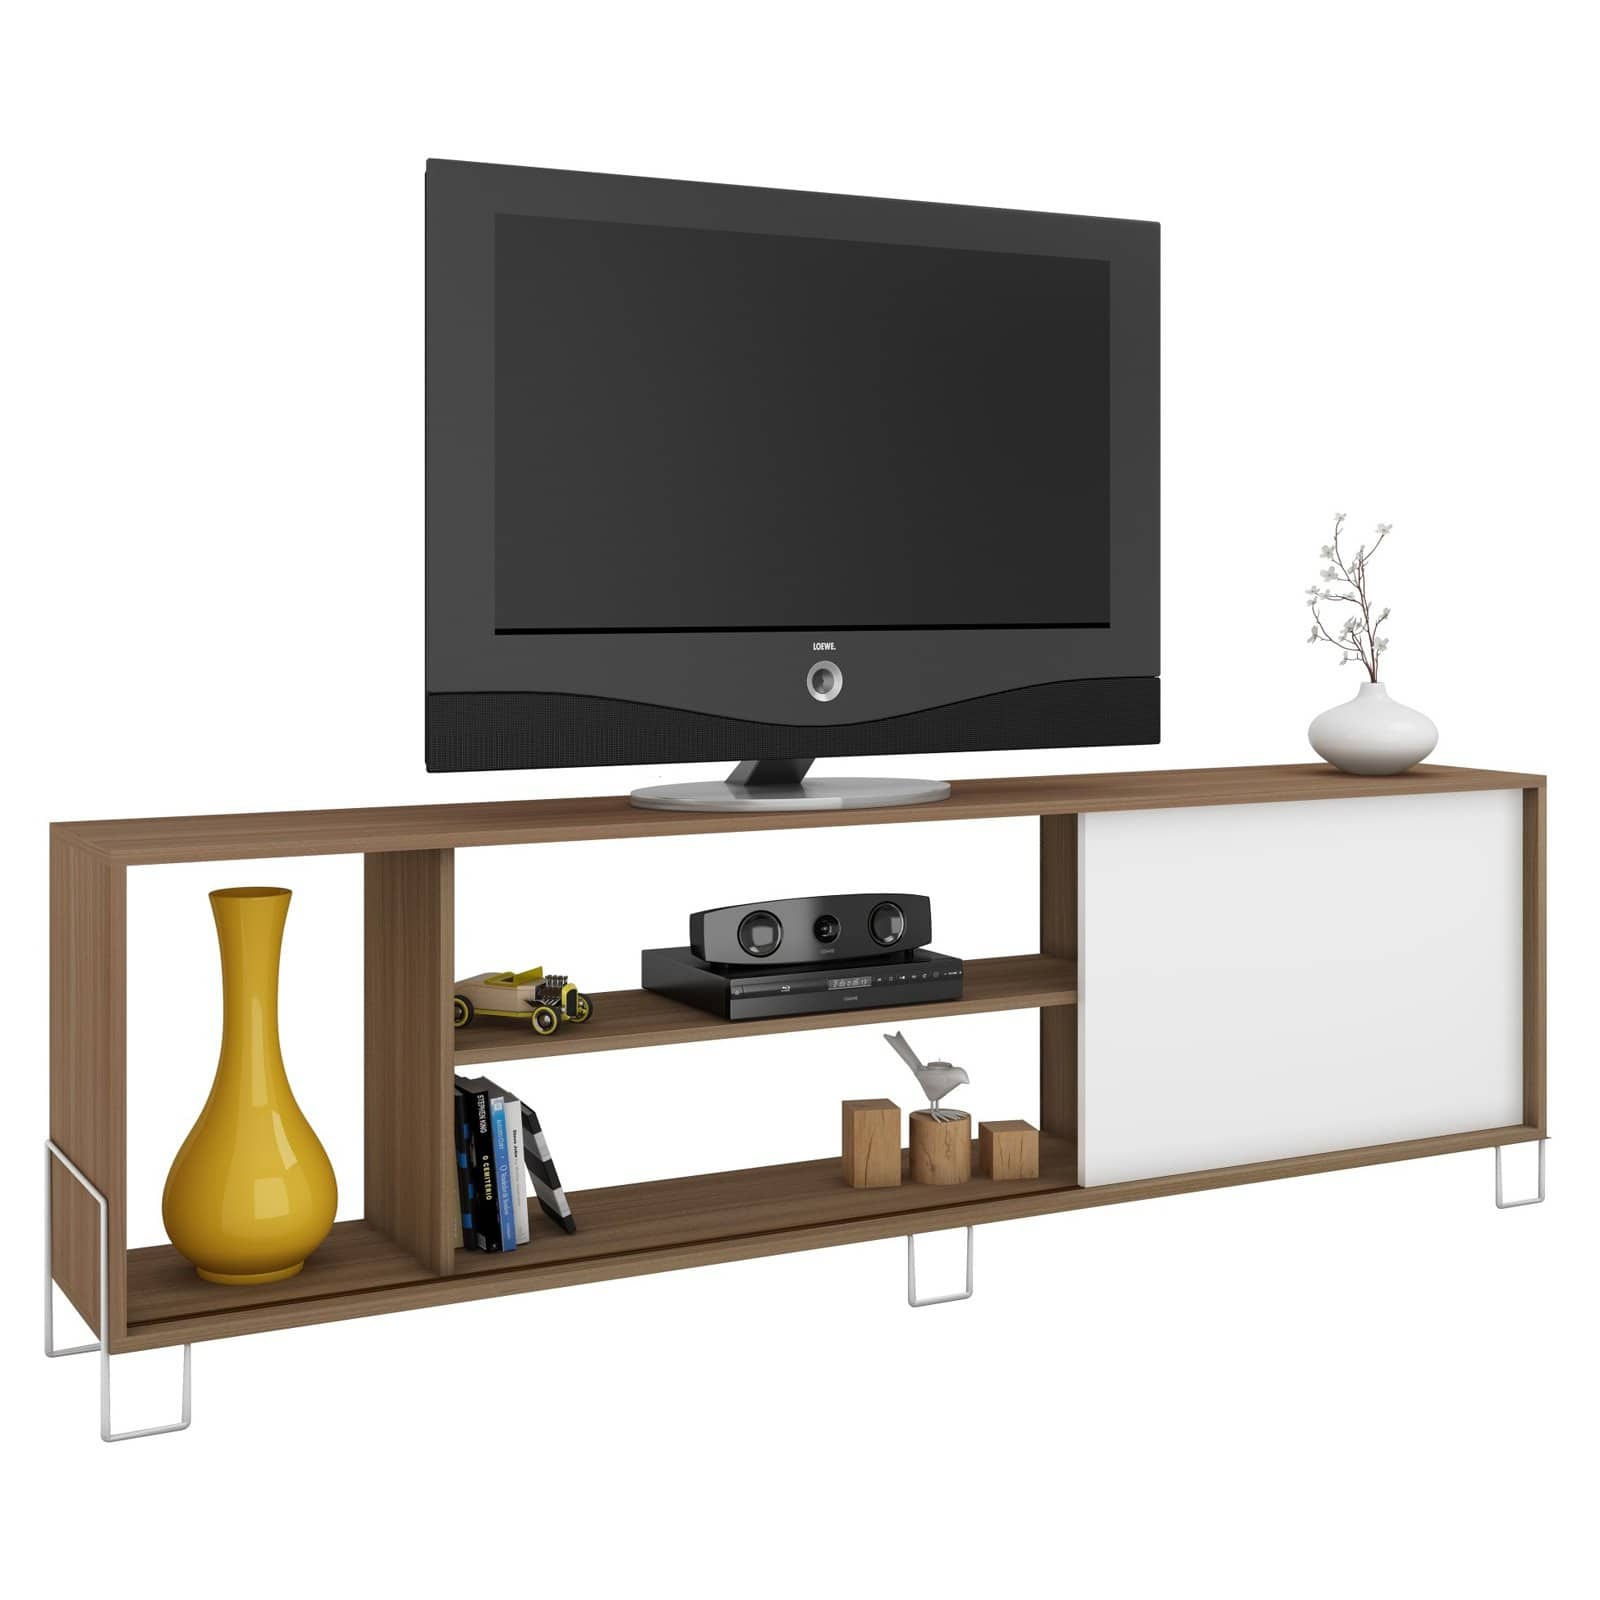 Nacka TV Stand 2.0 with 4 shelves in Oak and White - image 3 of 10